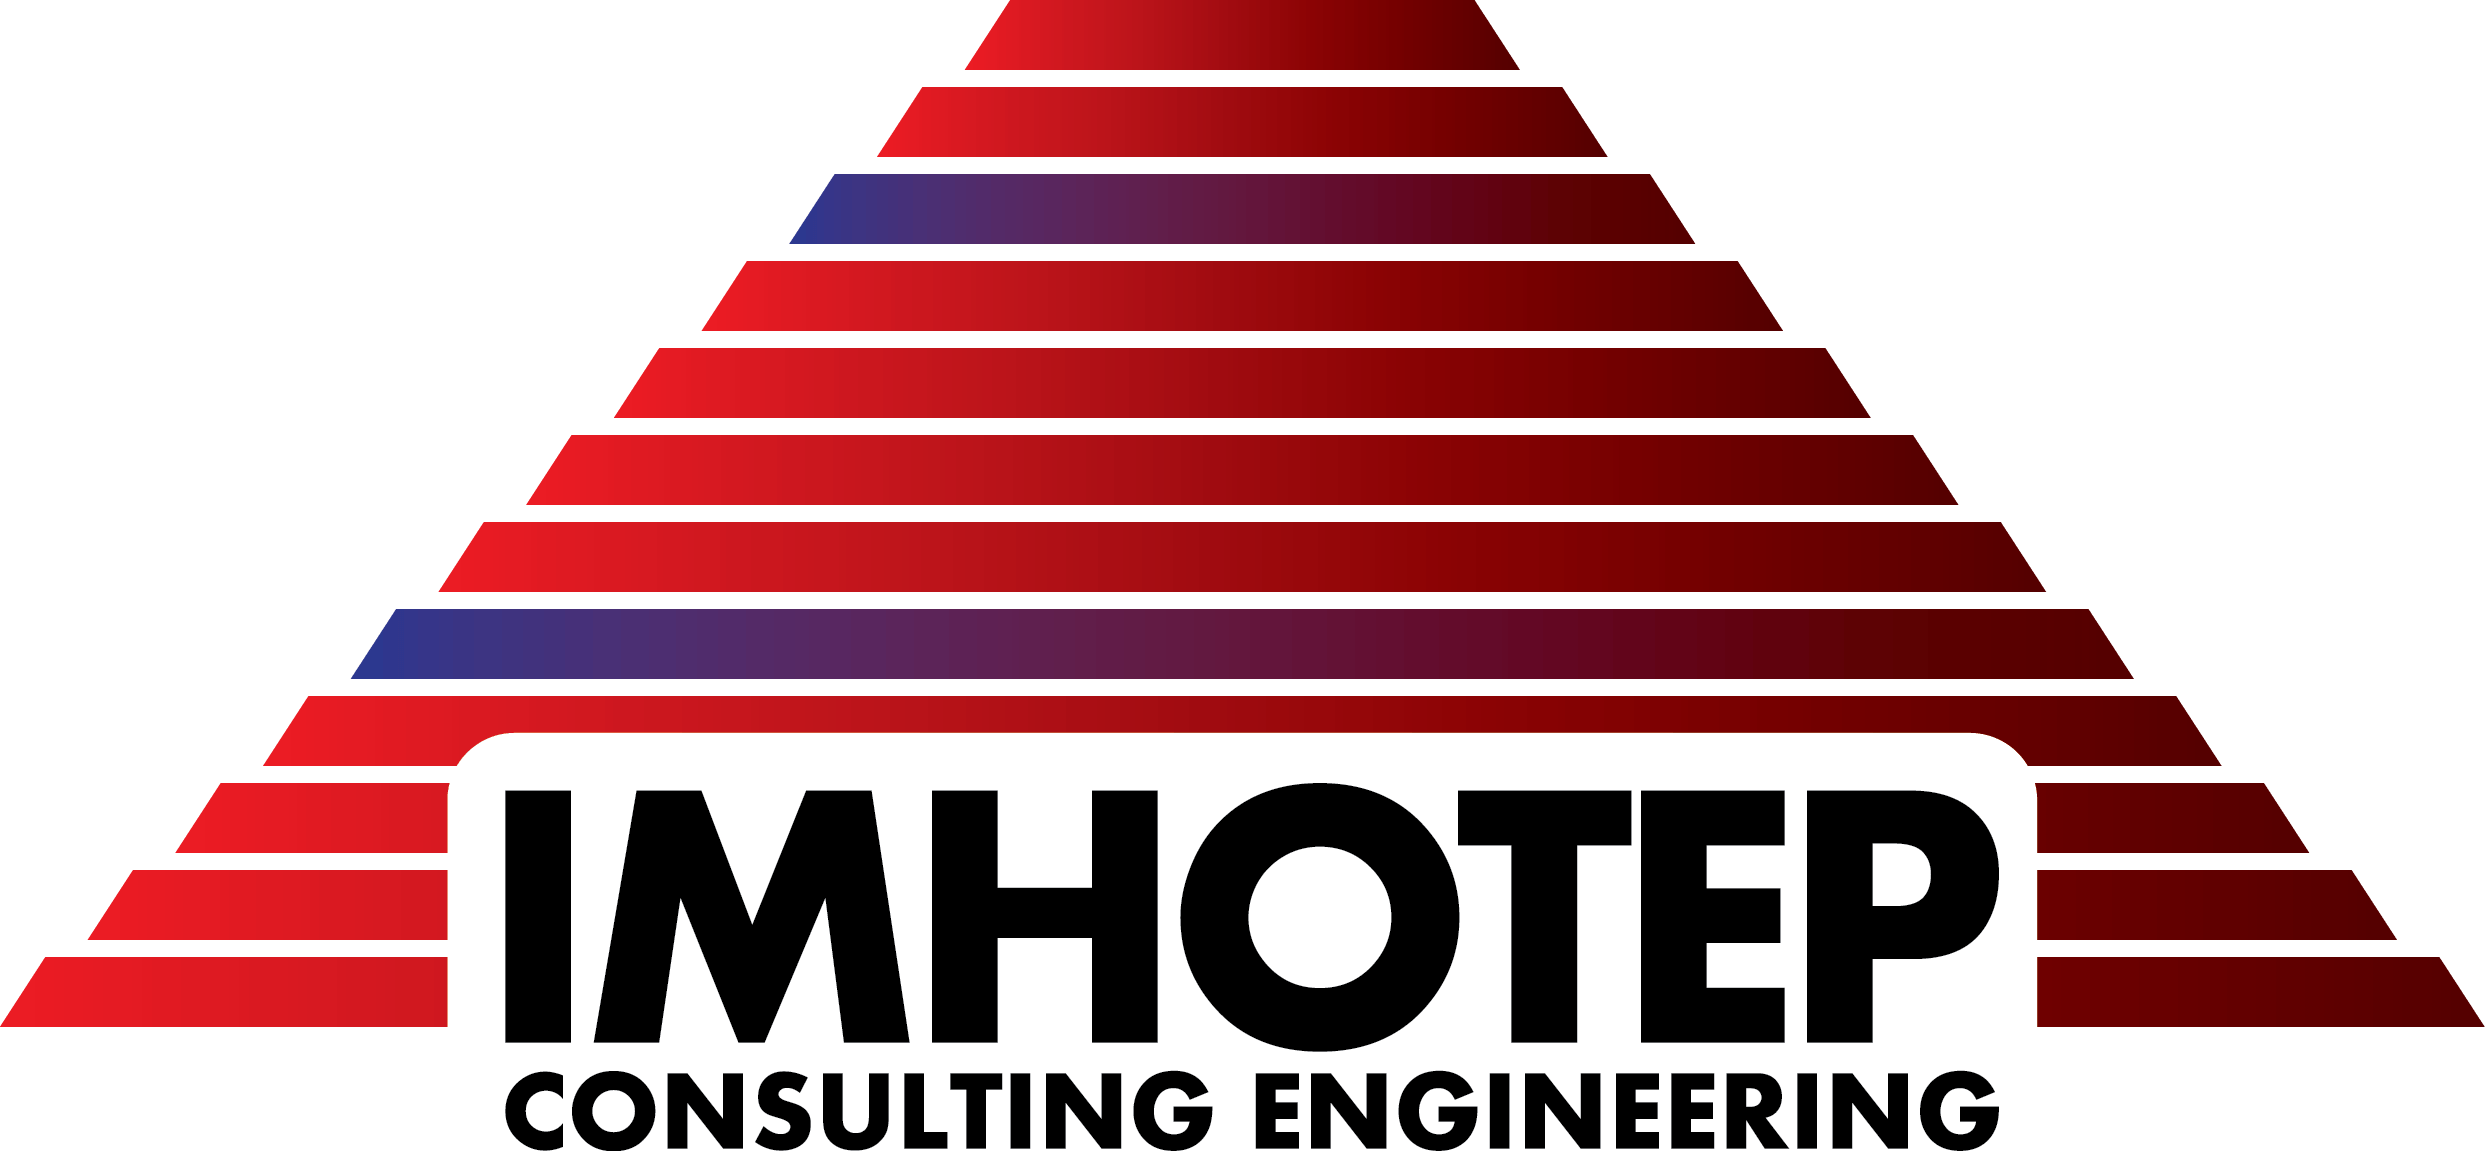 Imhotep Consulting Engineering Logo